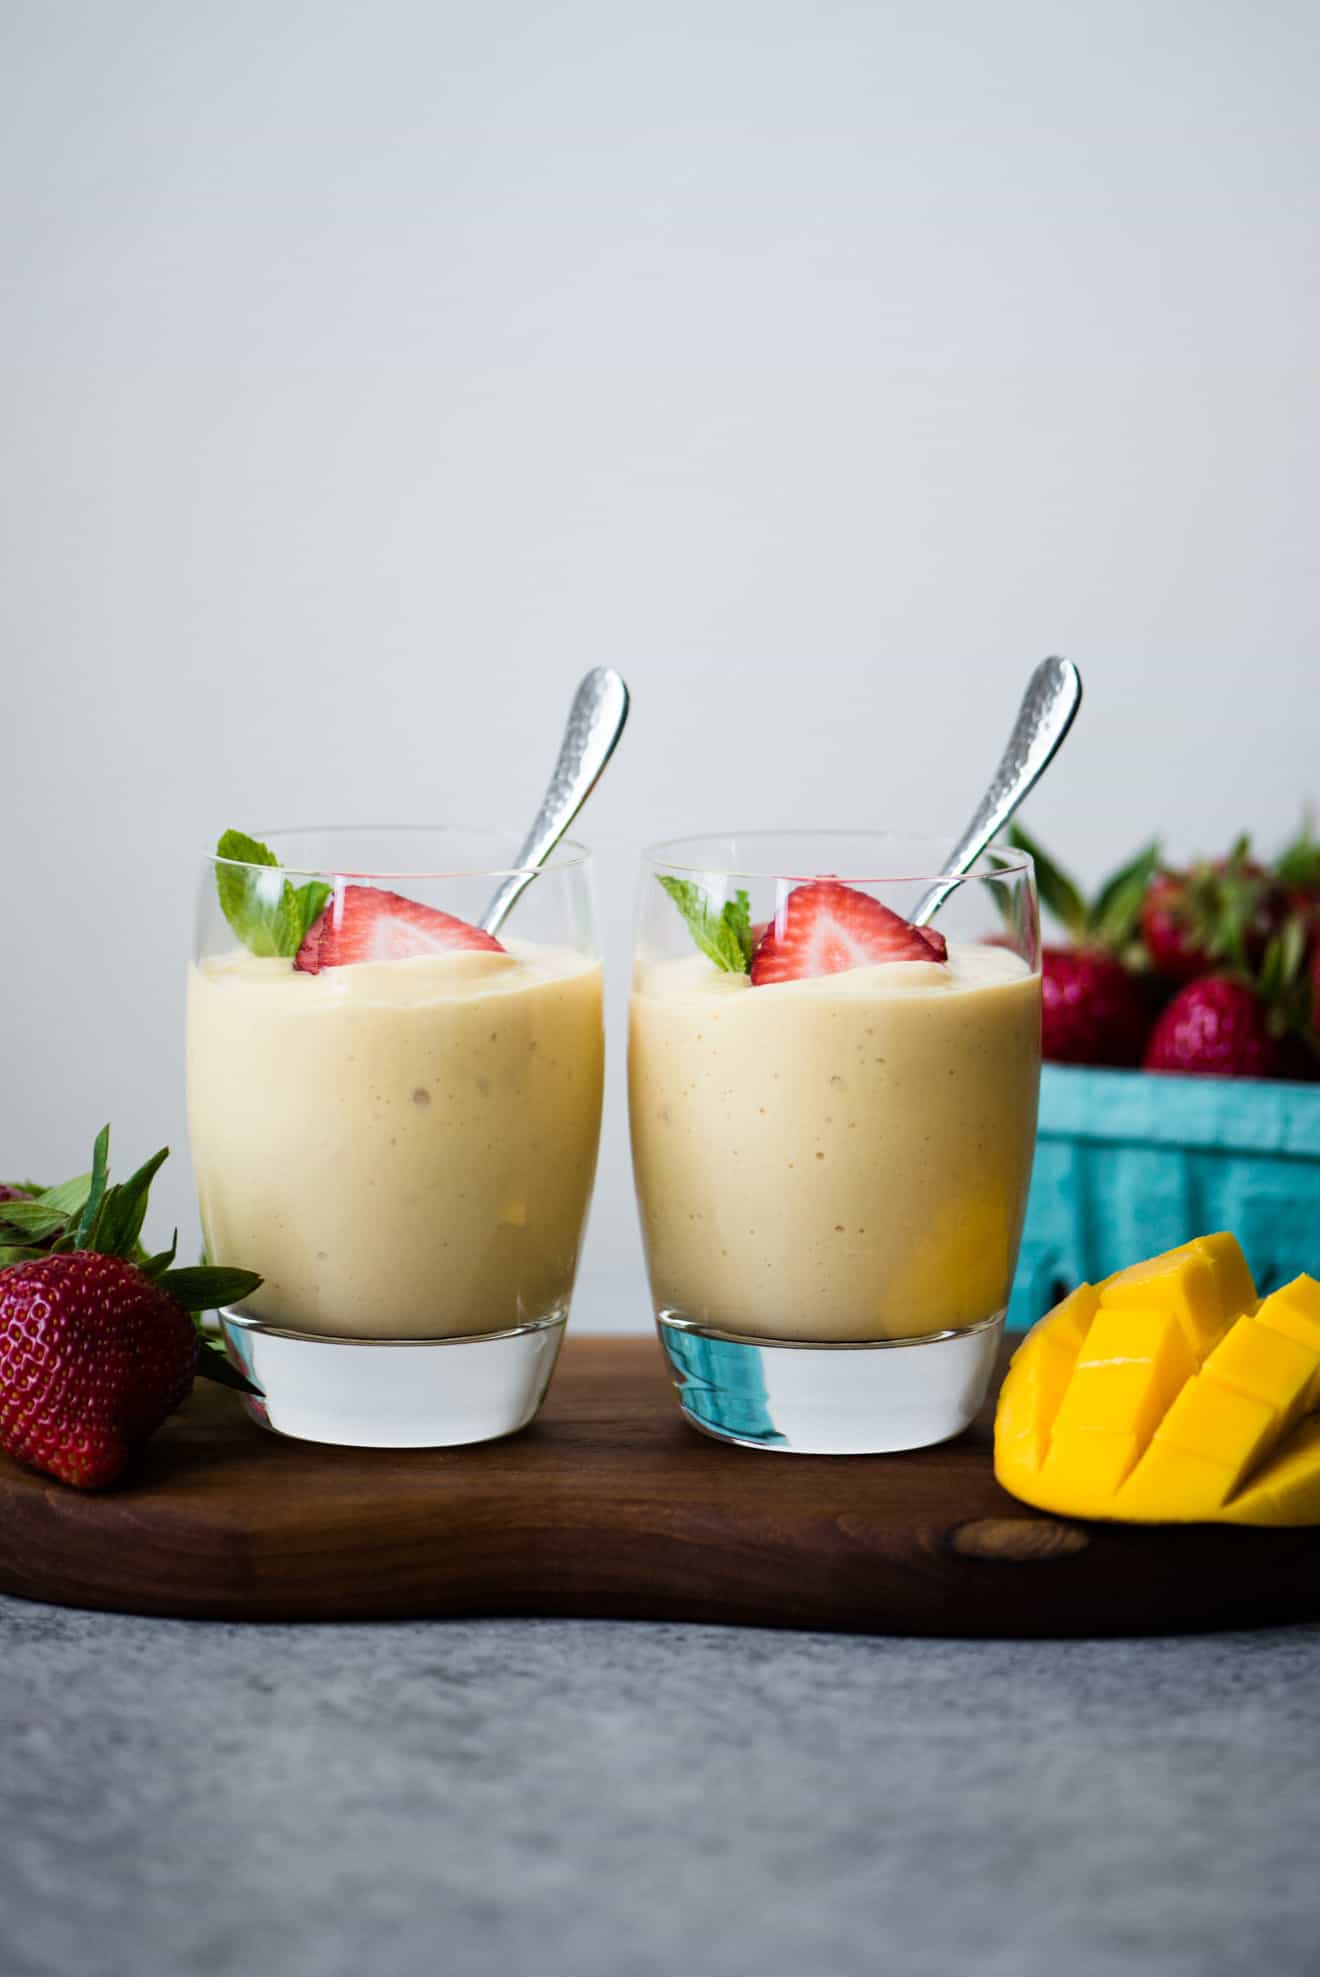 Vegan Mango and Pineapple Mousse - easy dessert made with just 5 ingredients!